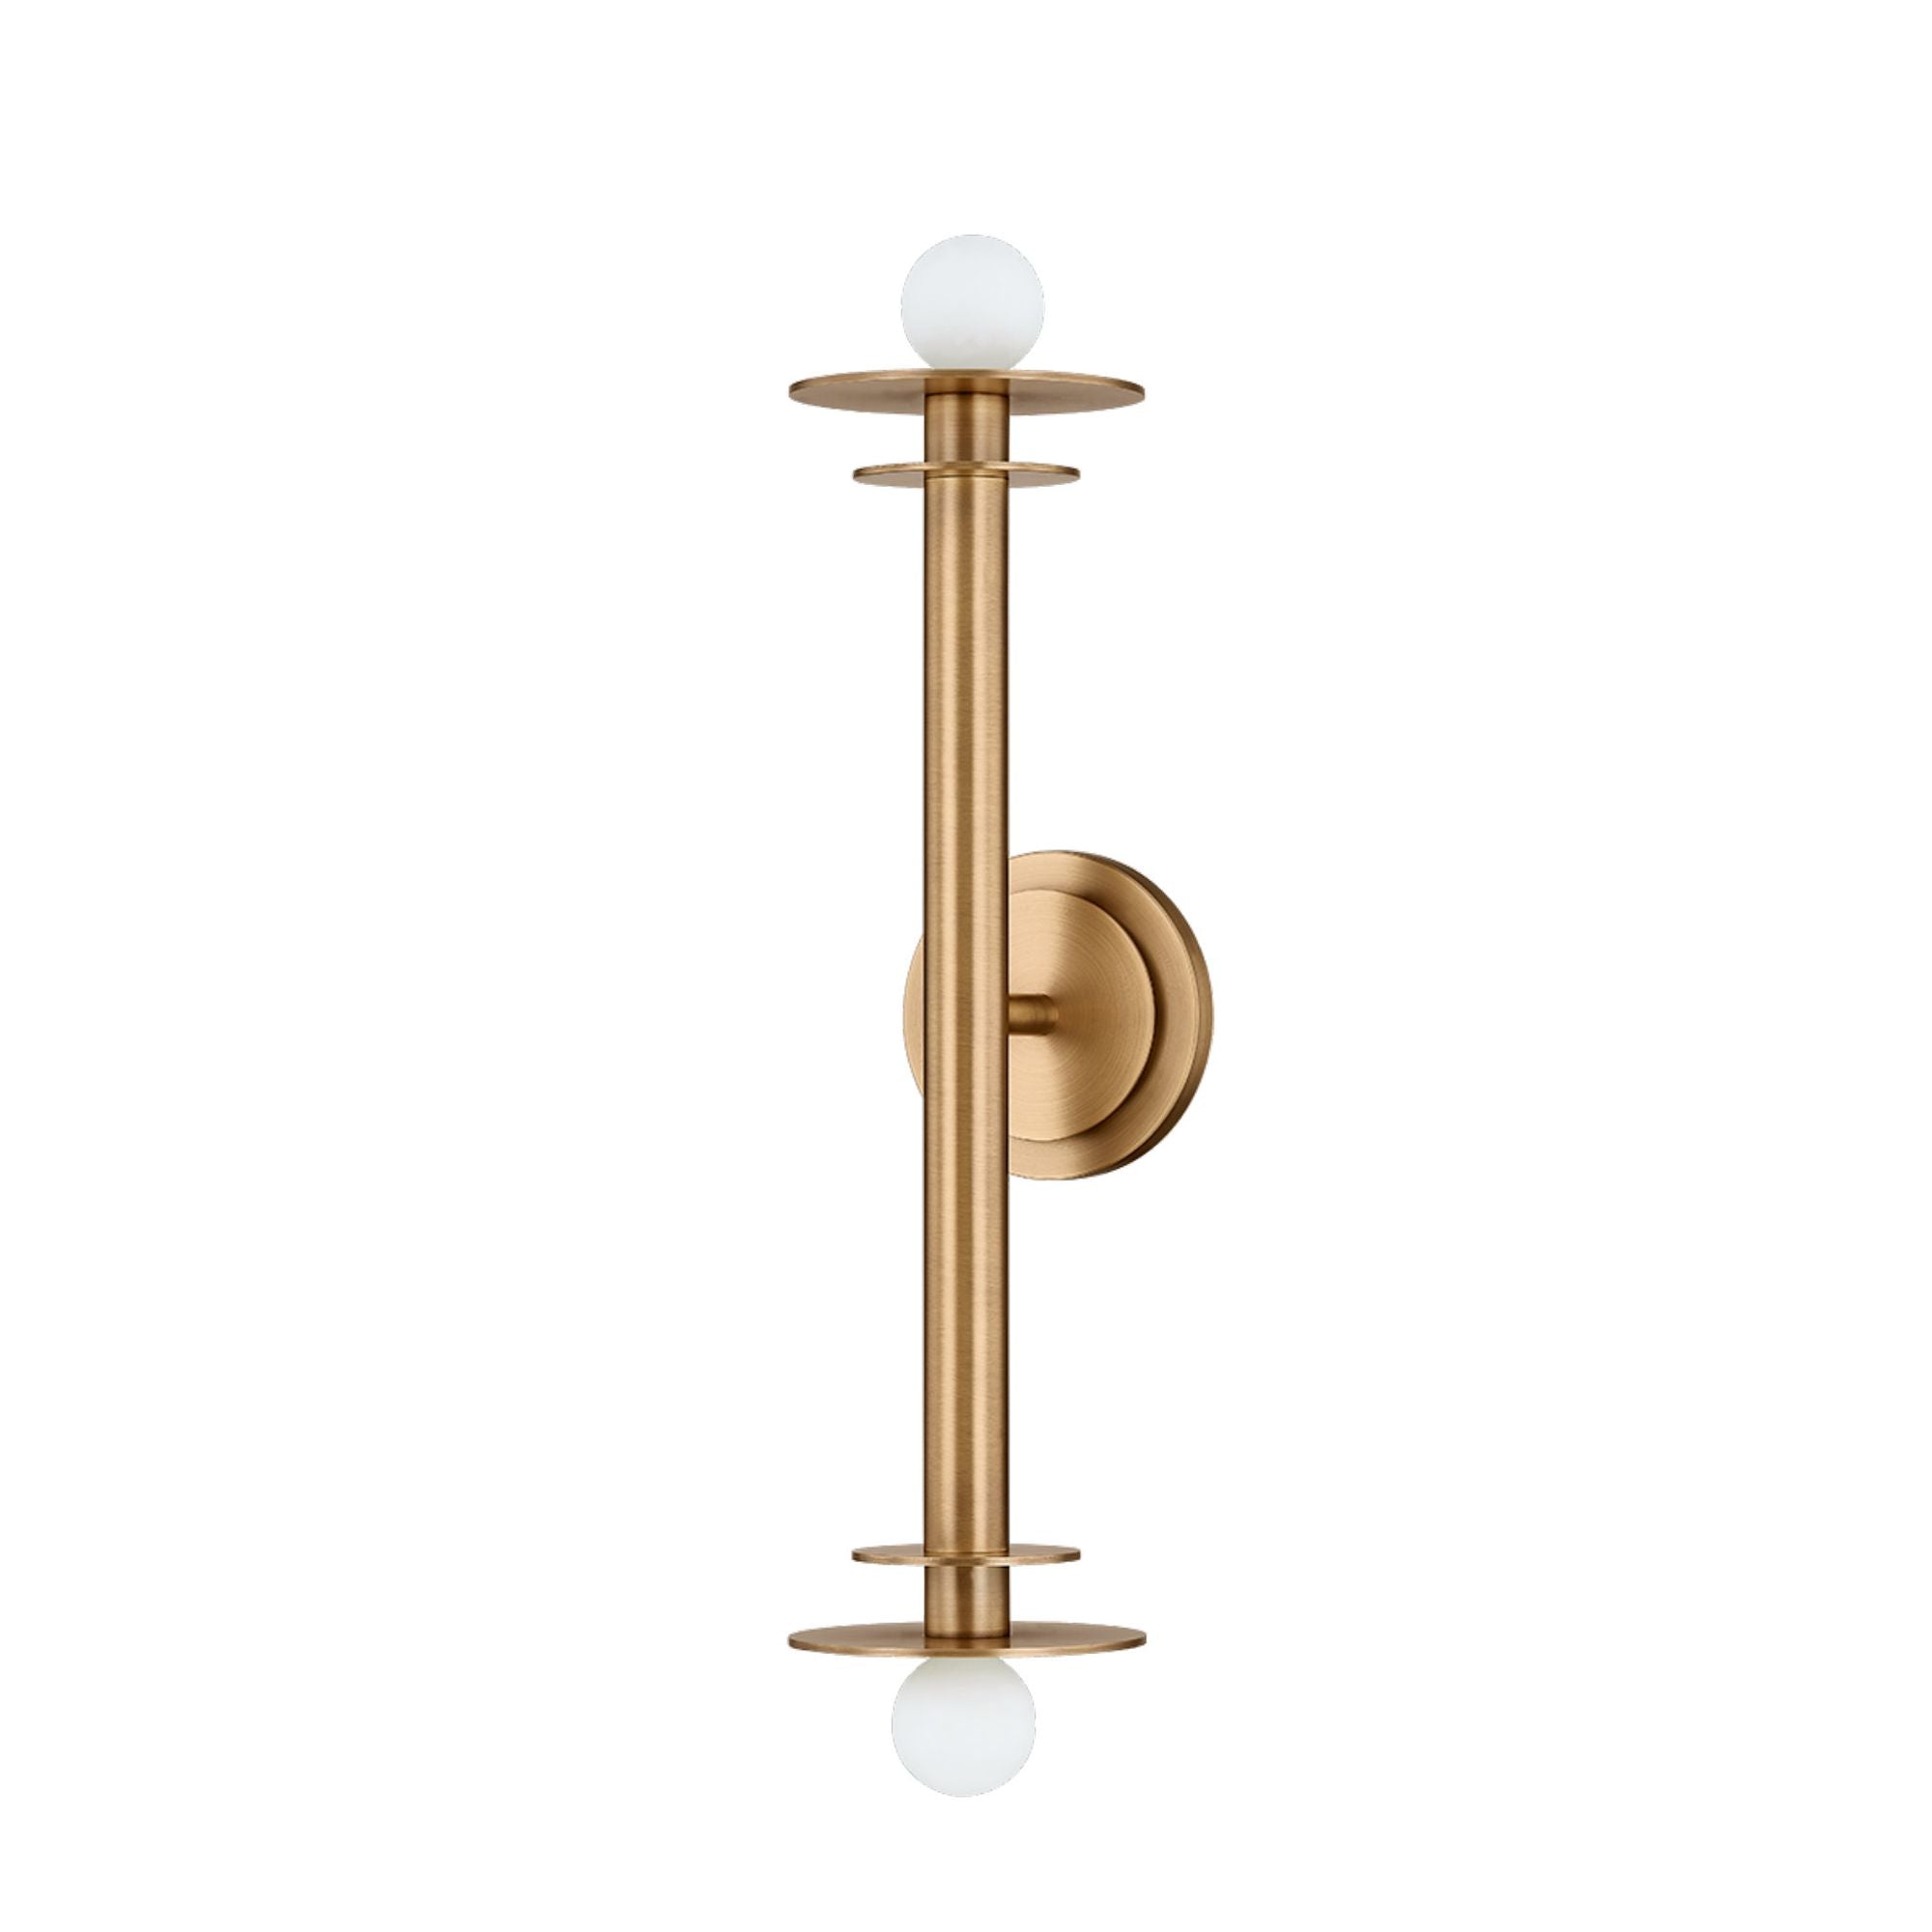 Arley 2 Light Wall Sconce in Patina Brass